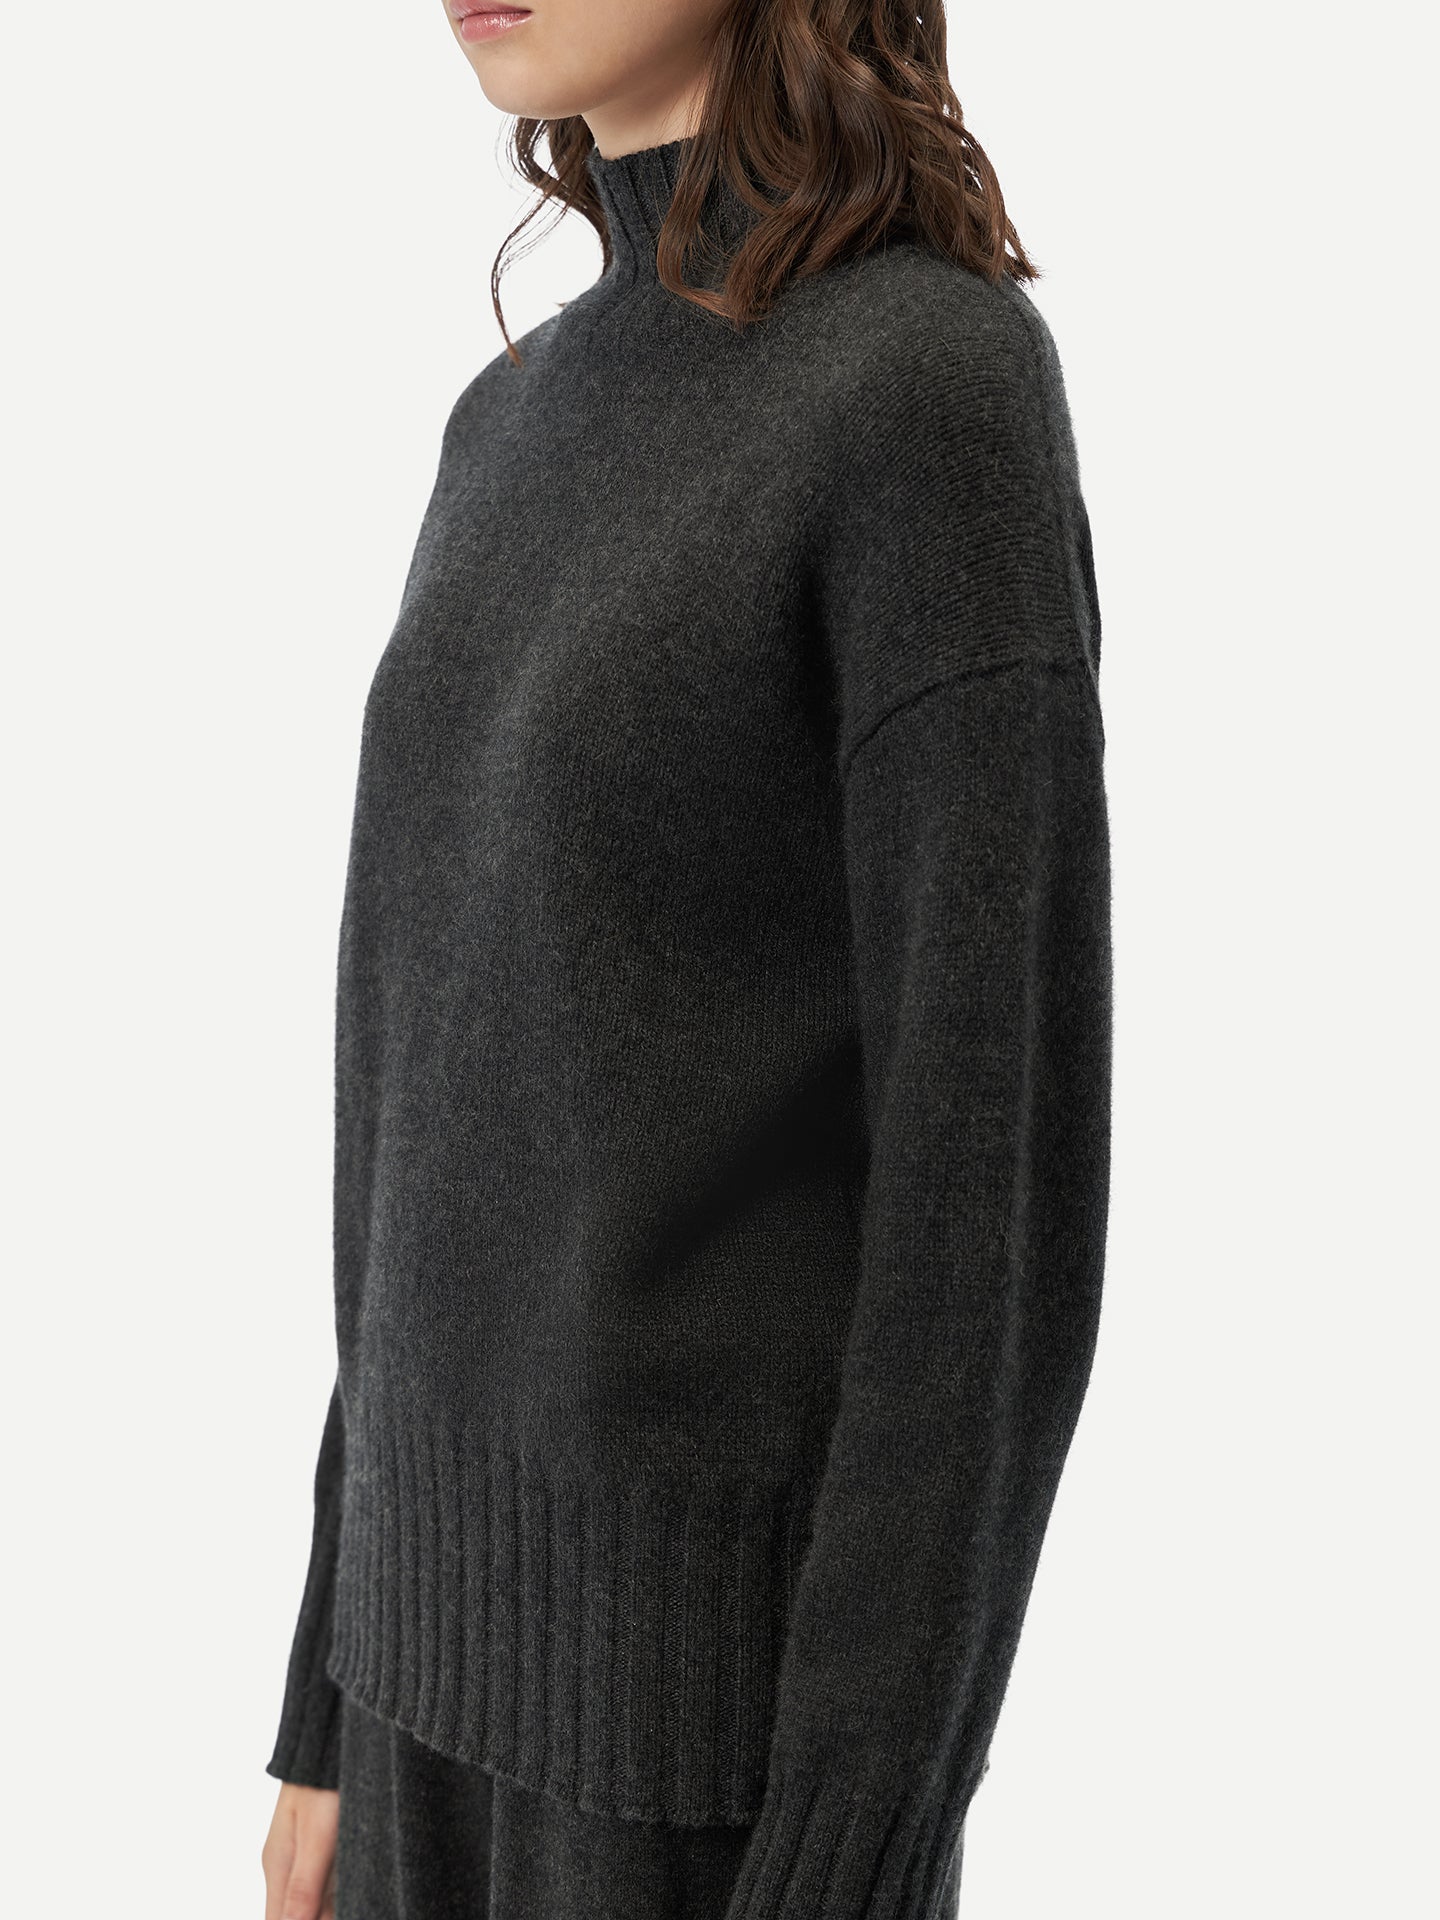 Women's Relaxed-Fit Cashmere Turtleneck Charcoal - Gobi Cashmere